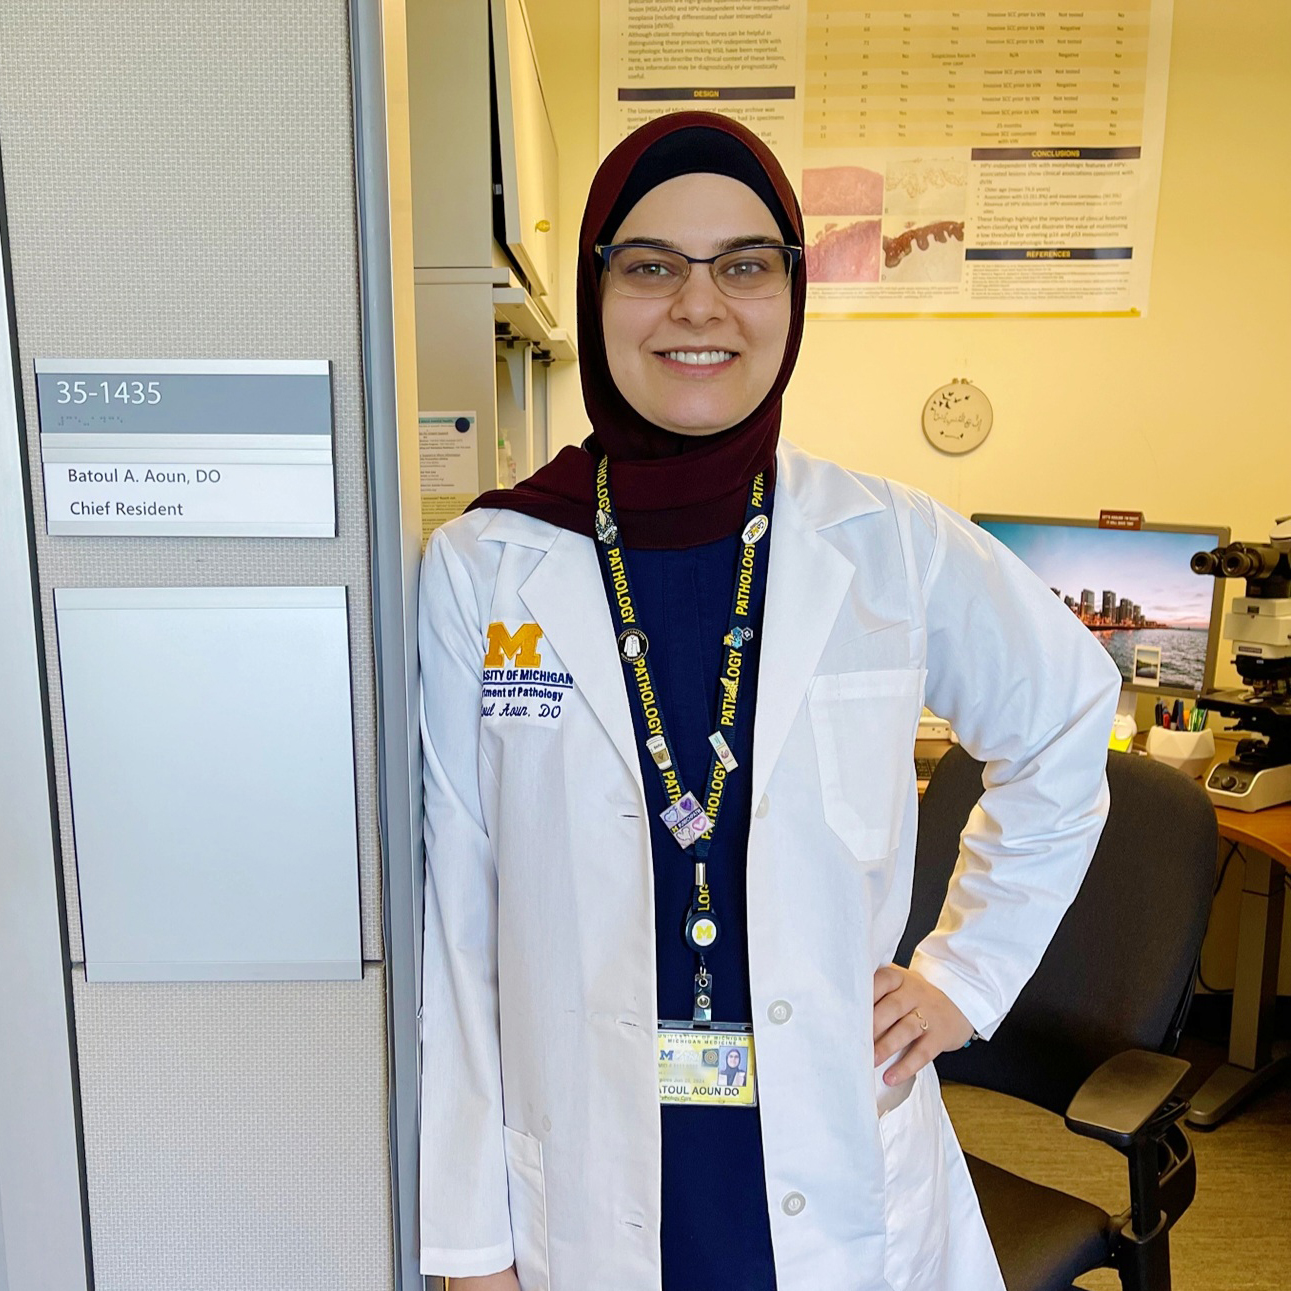 Chief Resident Batoul Aoun, DO at her office in the NCRC